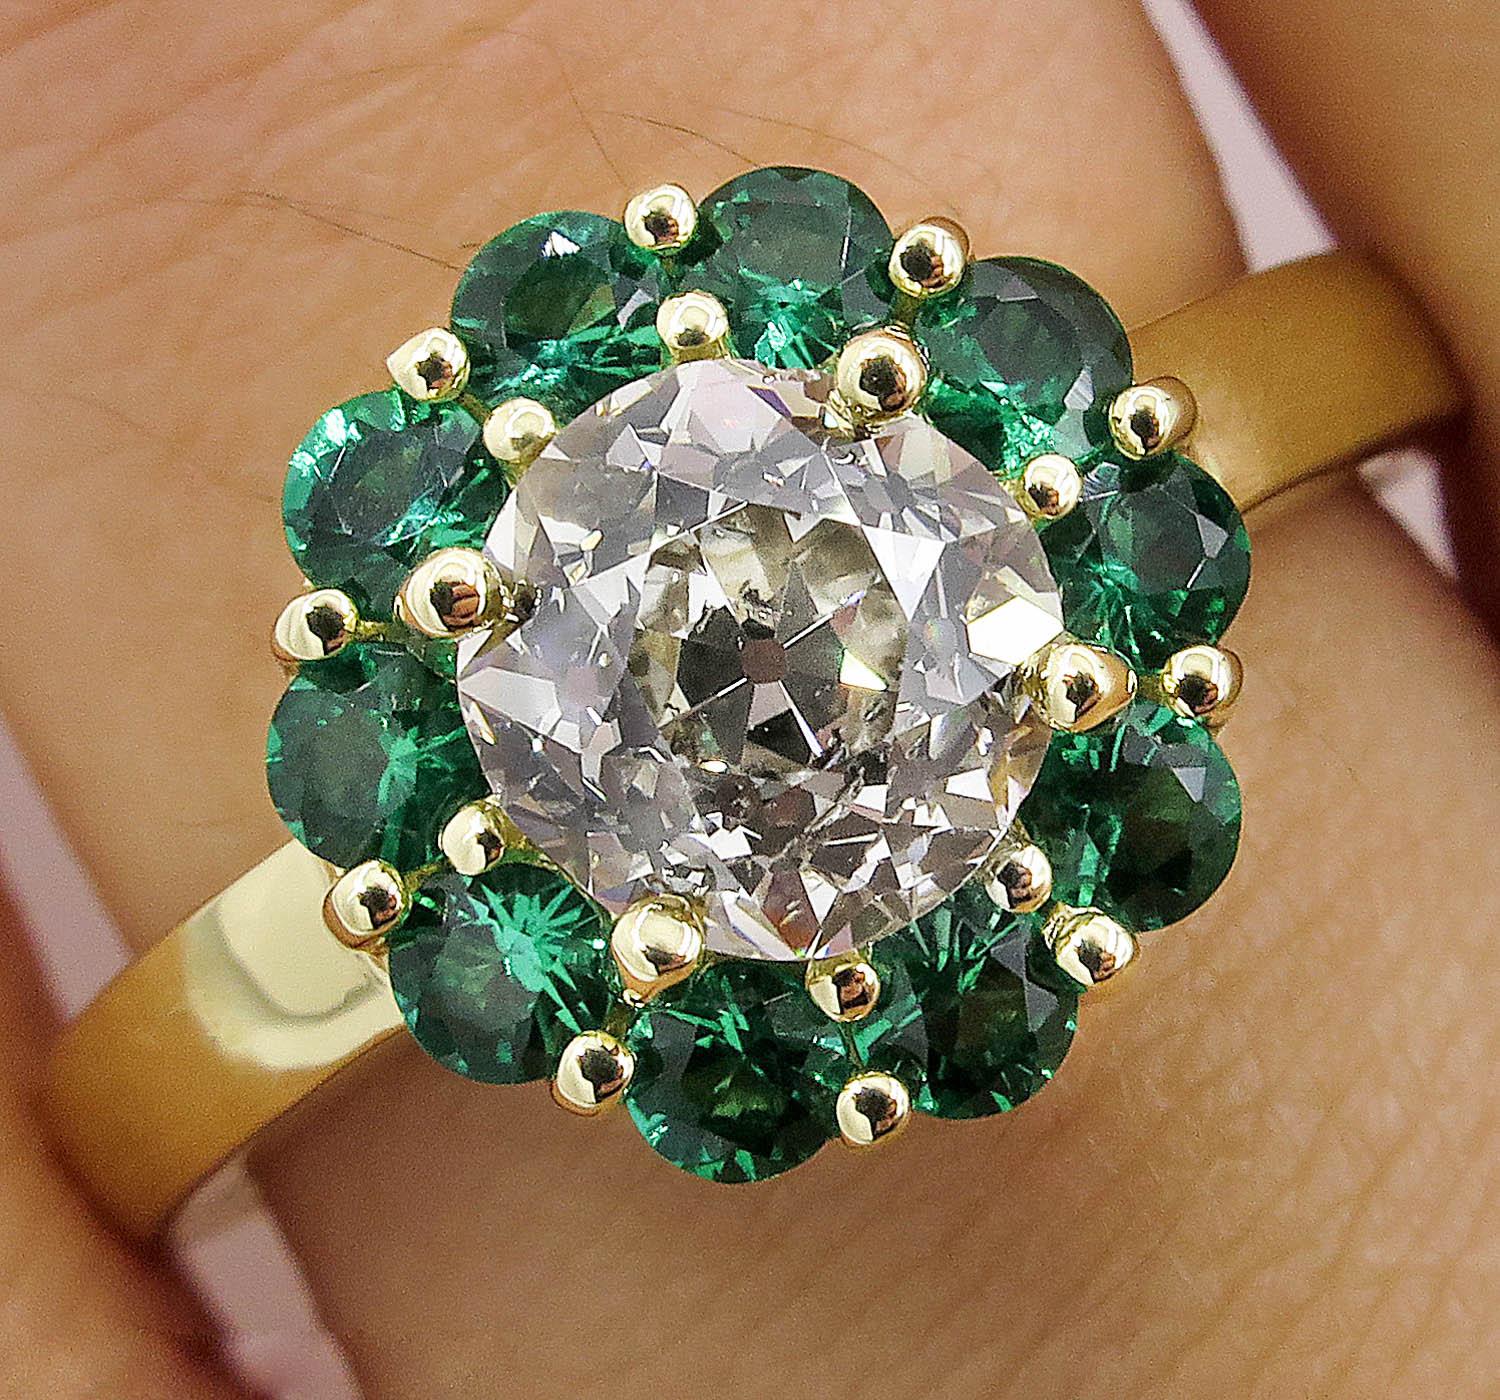 An Amazingly beautiful and Delicate Vintage Flower shaped 18k Yellow Gold Ring (stamped); the Center Diamond is Gemologic Certified 1.20ct Old European in K-L Color and SI2 clarity.
It is surrounded by 10 Round shaped NATURAL Bright Green Emeralds;